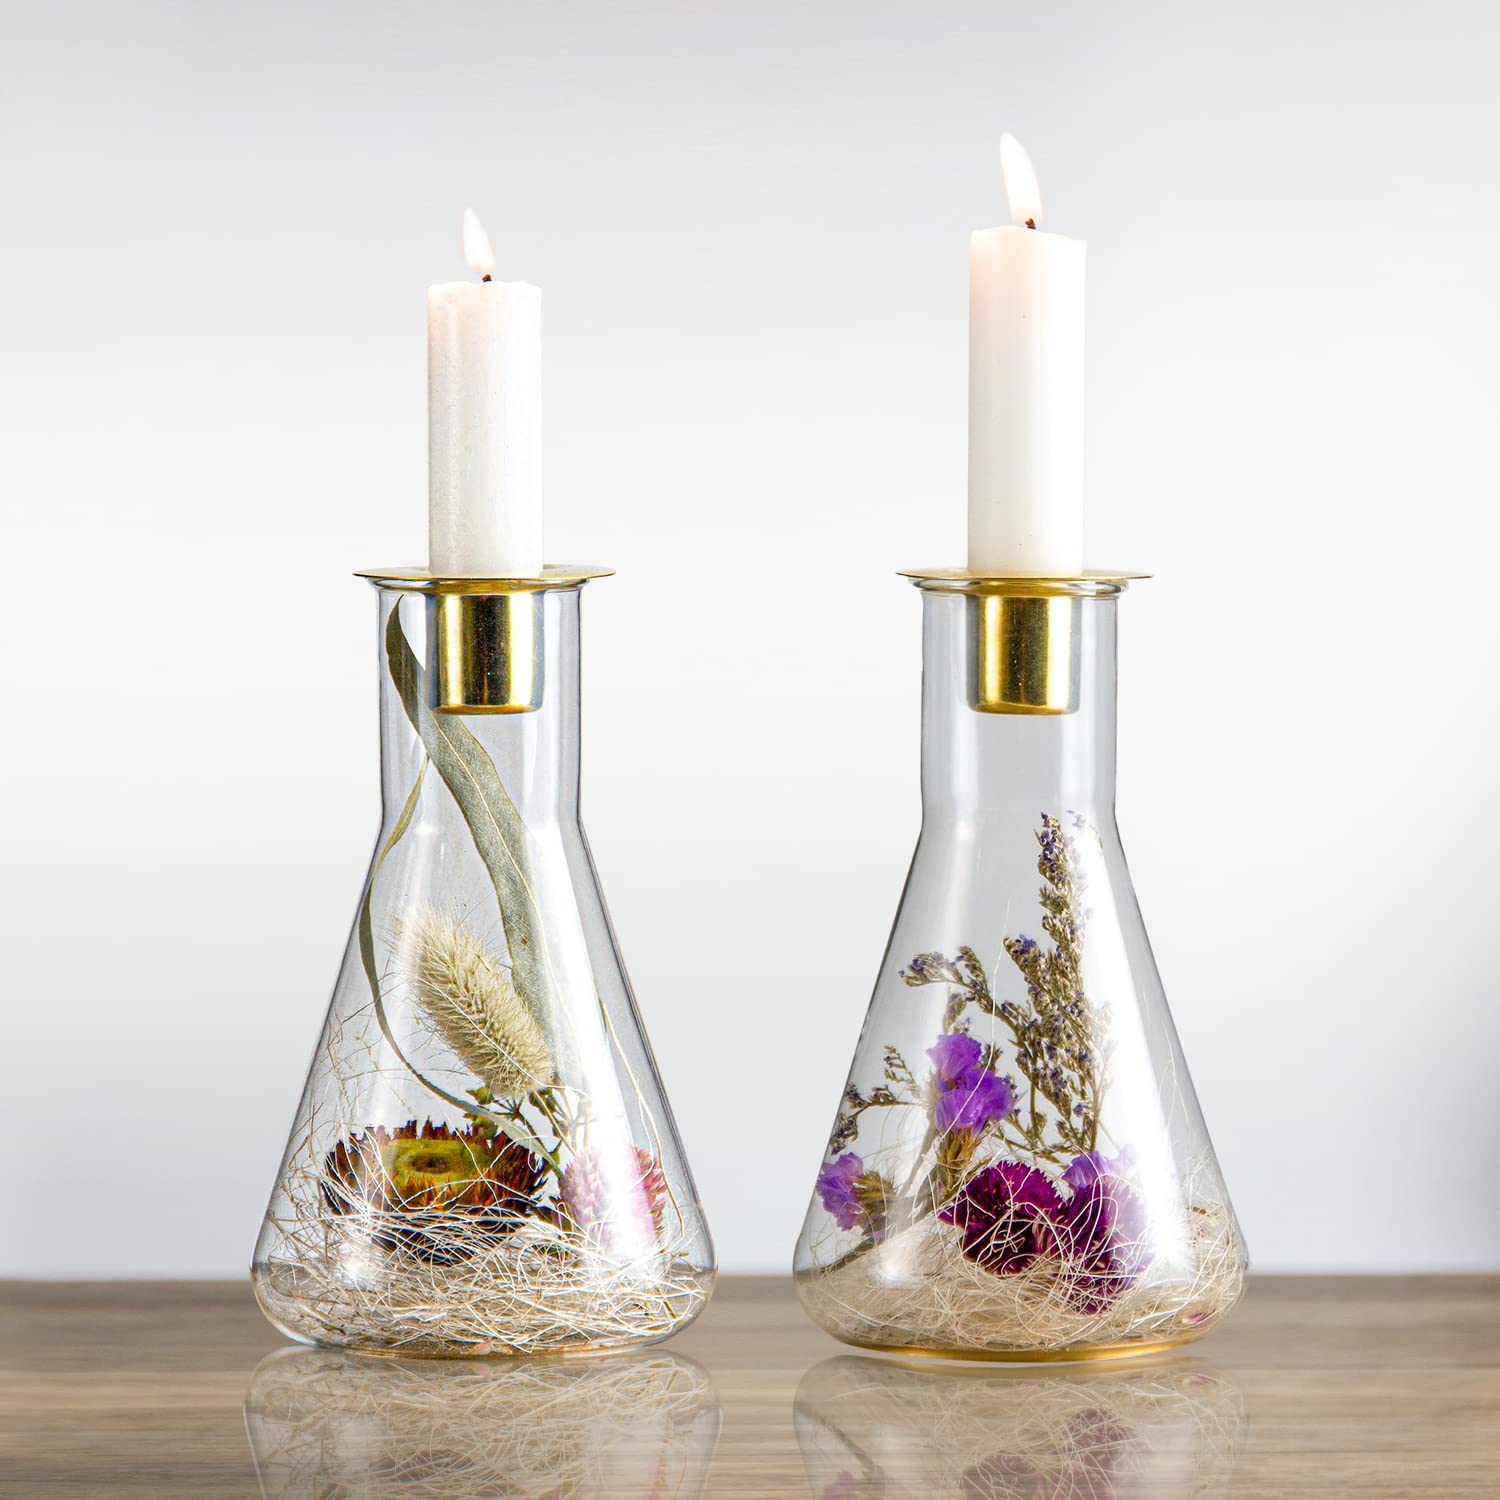 Newly ArrivalWood Box Gift Set - Taper Candle Holder,Glass Candlestick Holders with Dried Flower Bottle,Vintage Candle Stick Holder Set of 2 for Home Decor – Shunstone